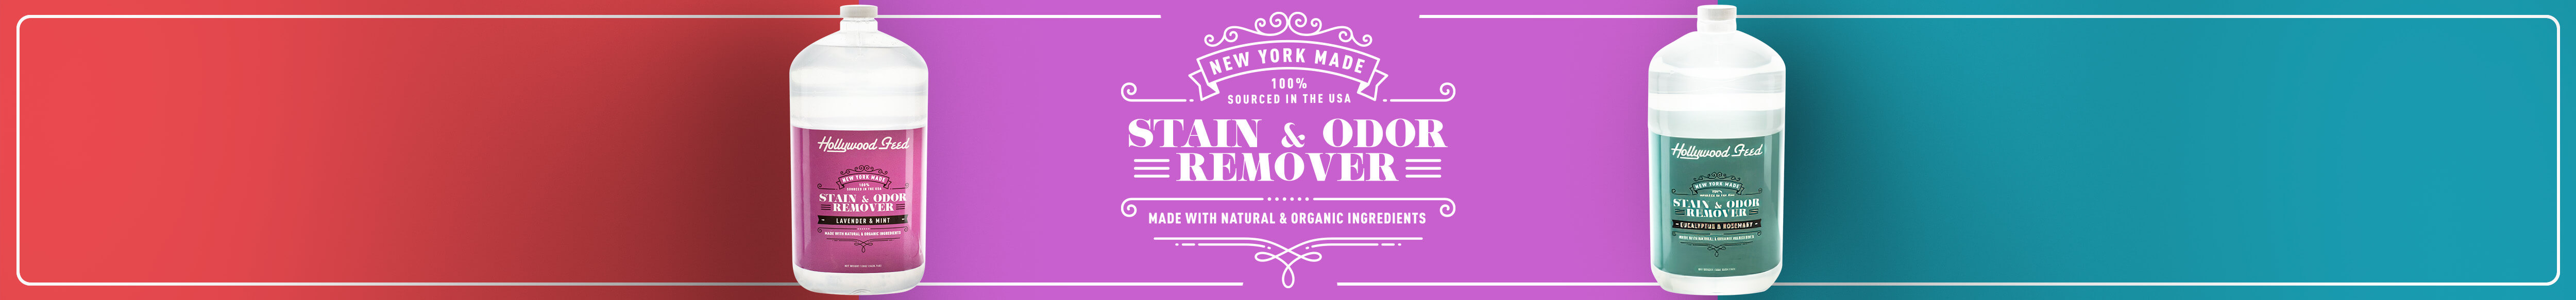 New York Made Stain and Odor Remover